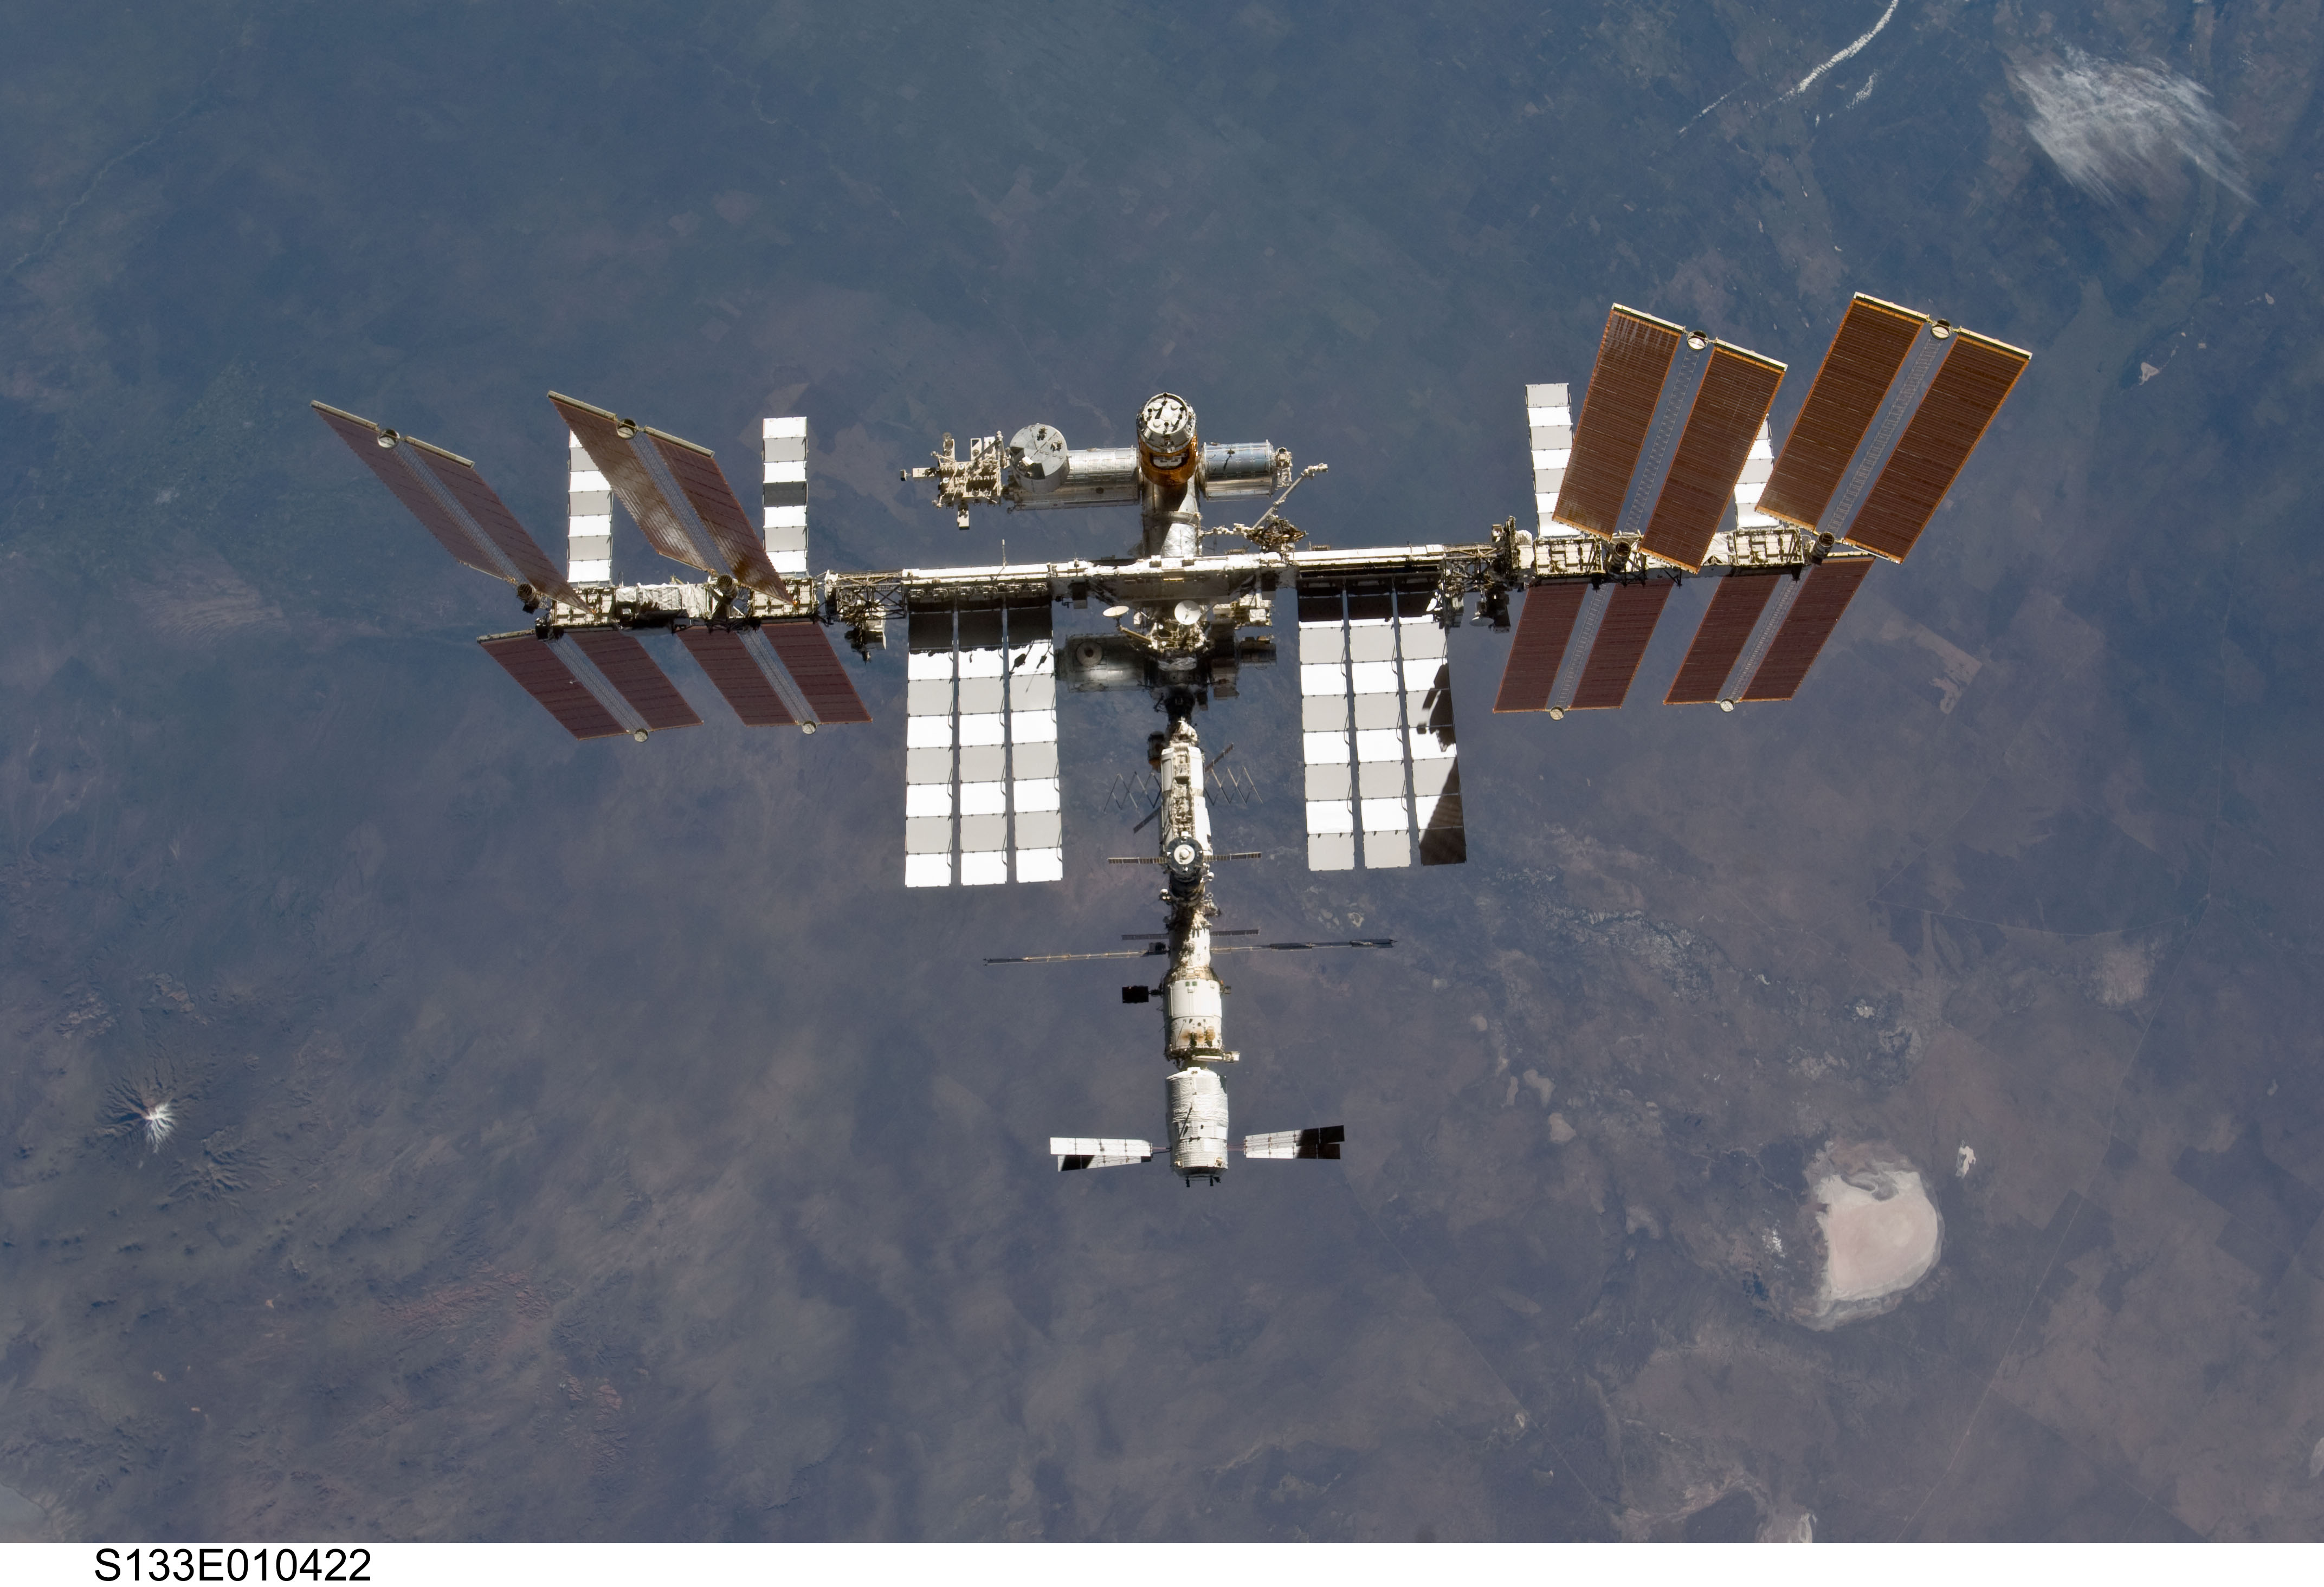 Space in Images - 2011 - 03 - ISS seen from Space Shuttle Discovery